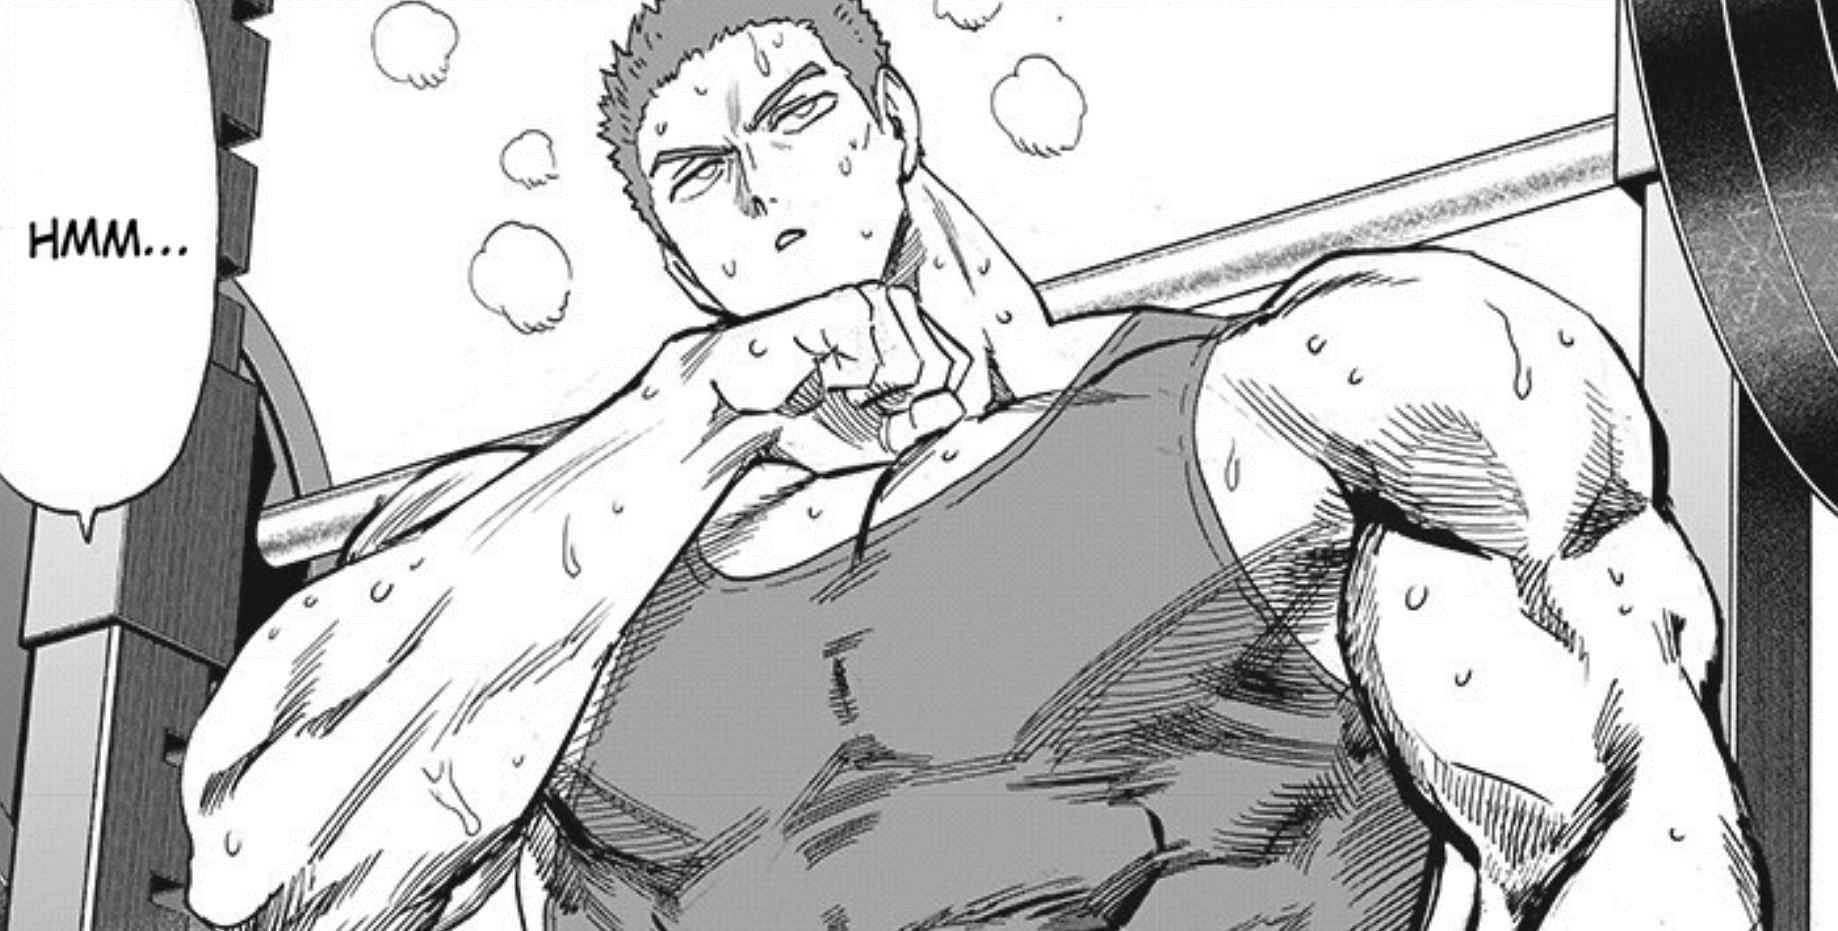 Tanktop Master as seen in One Punch Man chapter 185 (Image via Shueisha)